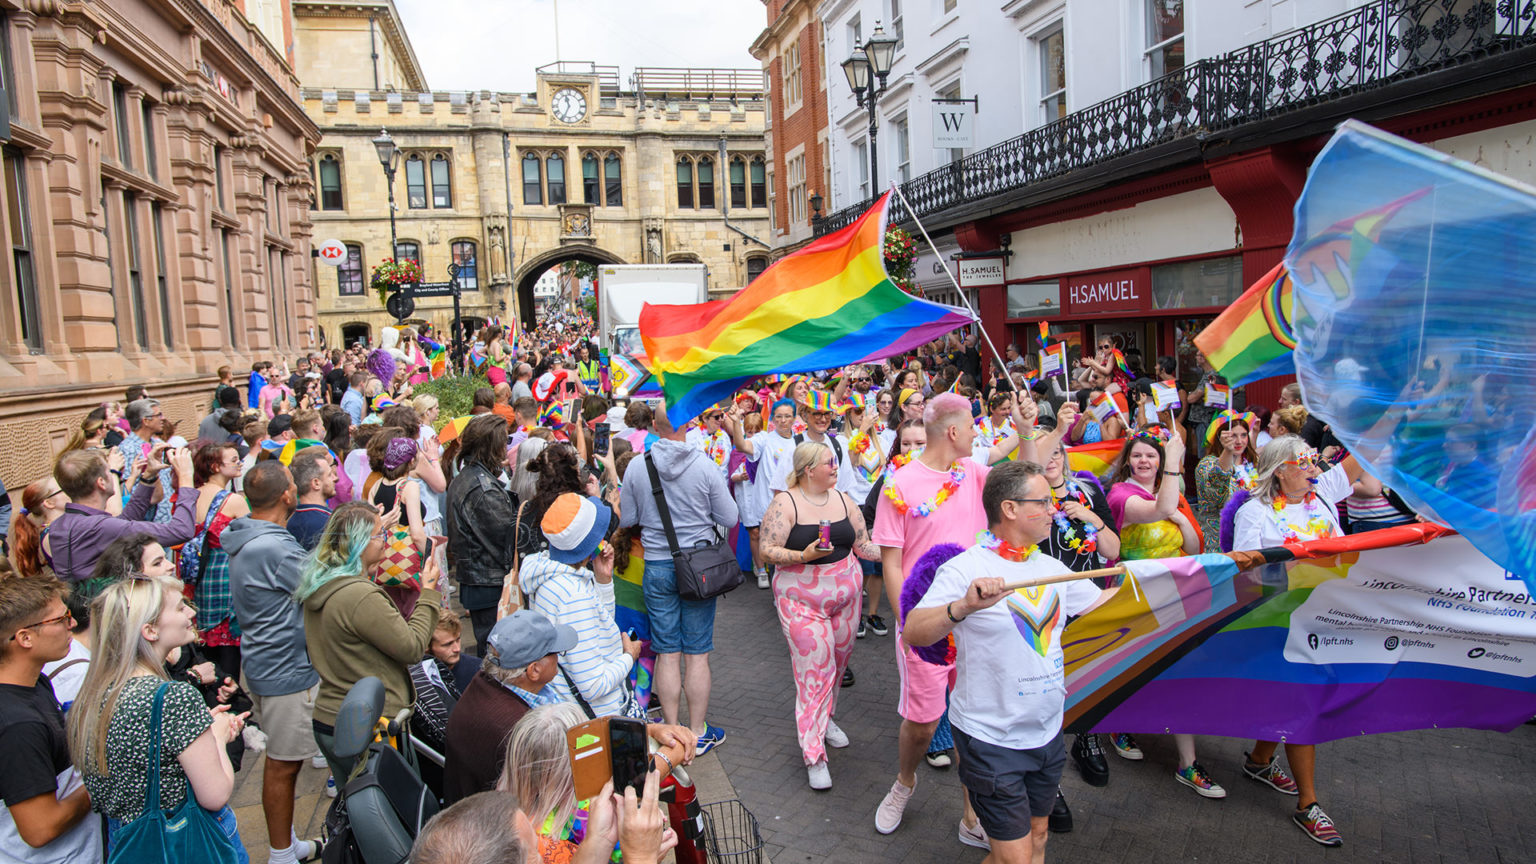 Police officers impress crowd with Macarena dance at Lincoln Pride